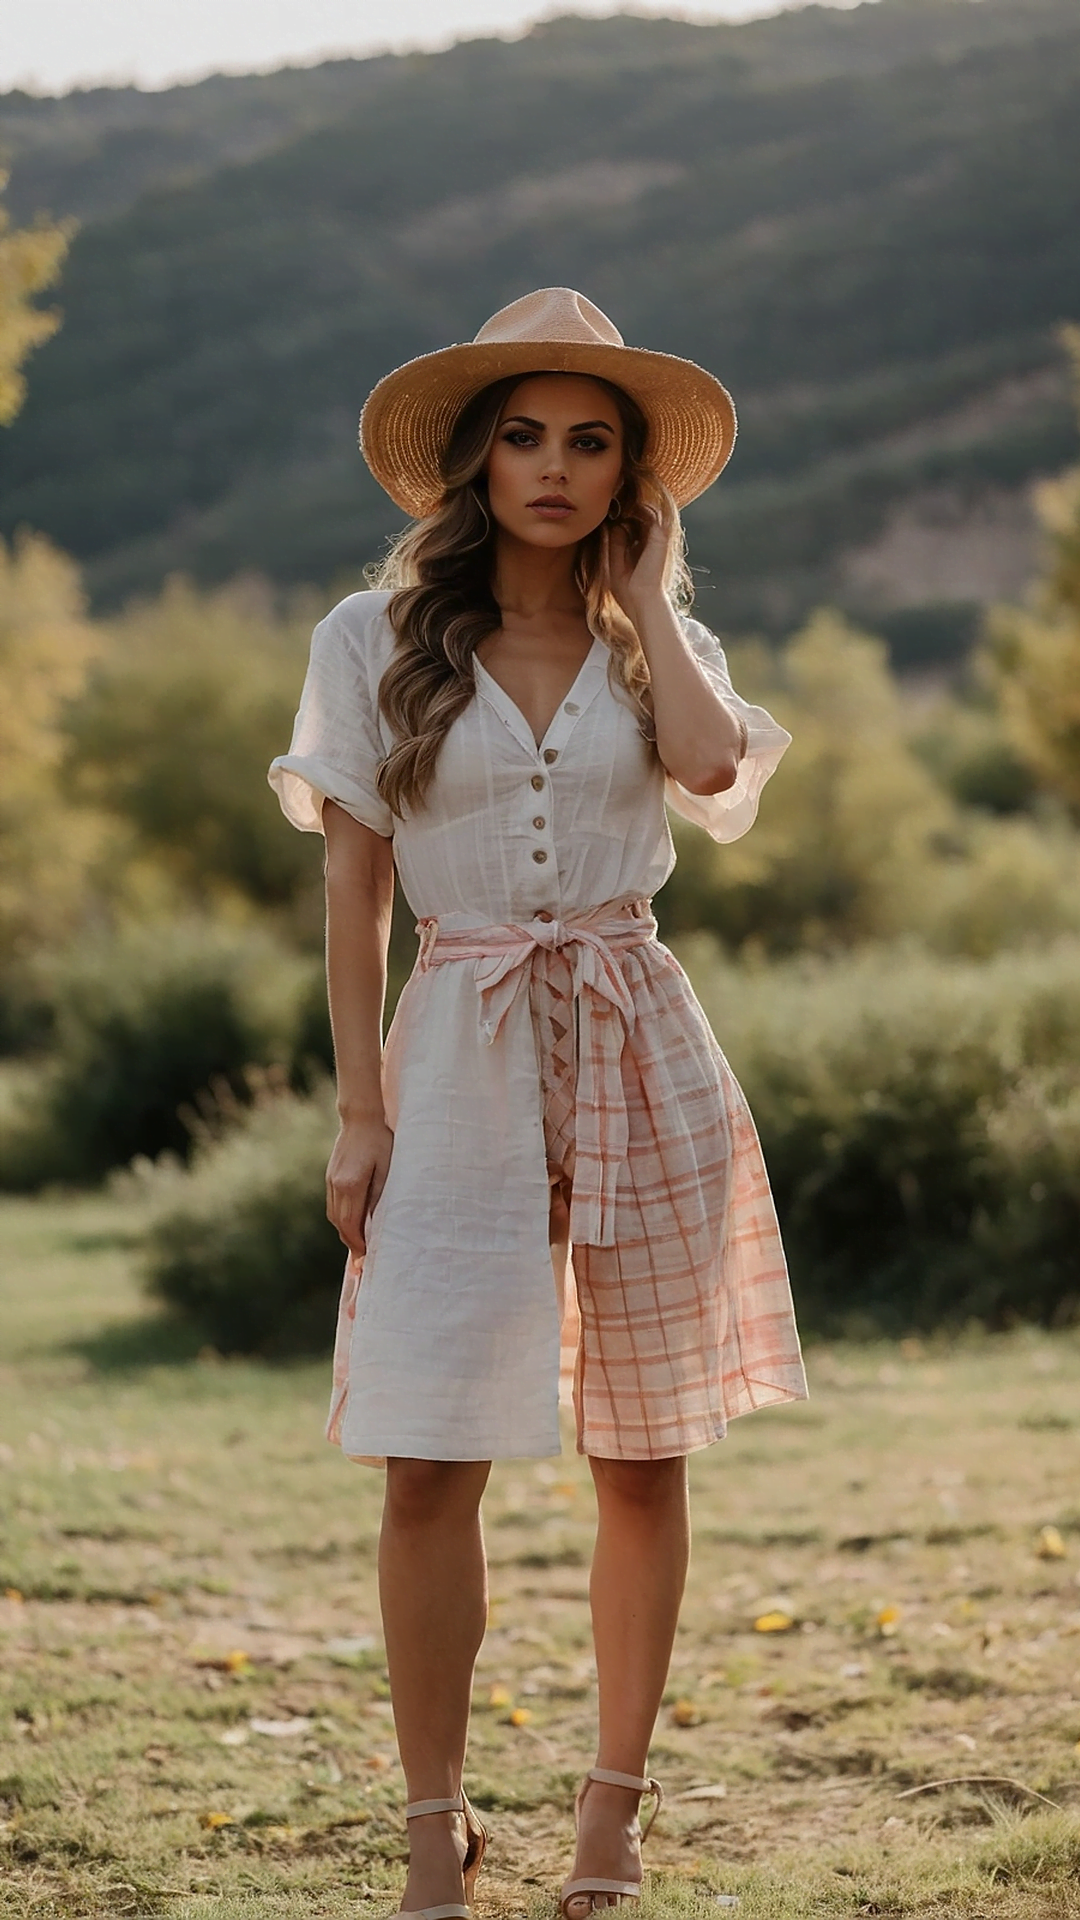 Outdoor Elegance: Women's High-Fashion Picnic Outfits